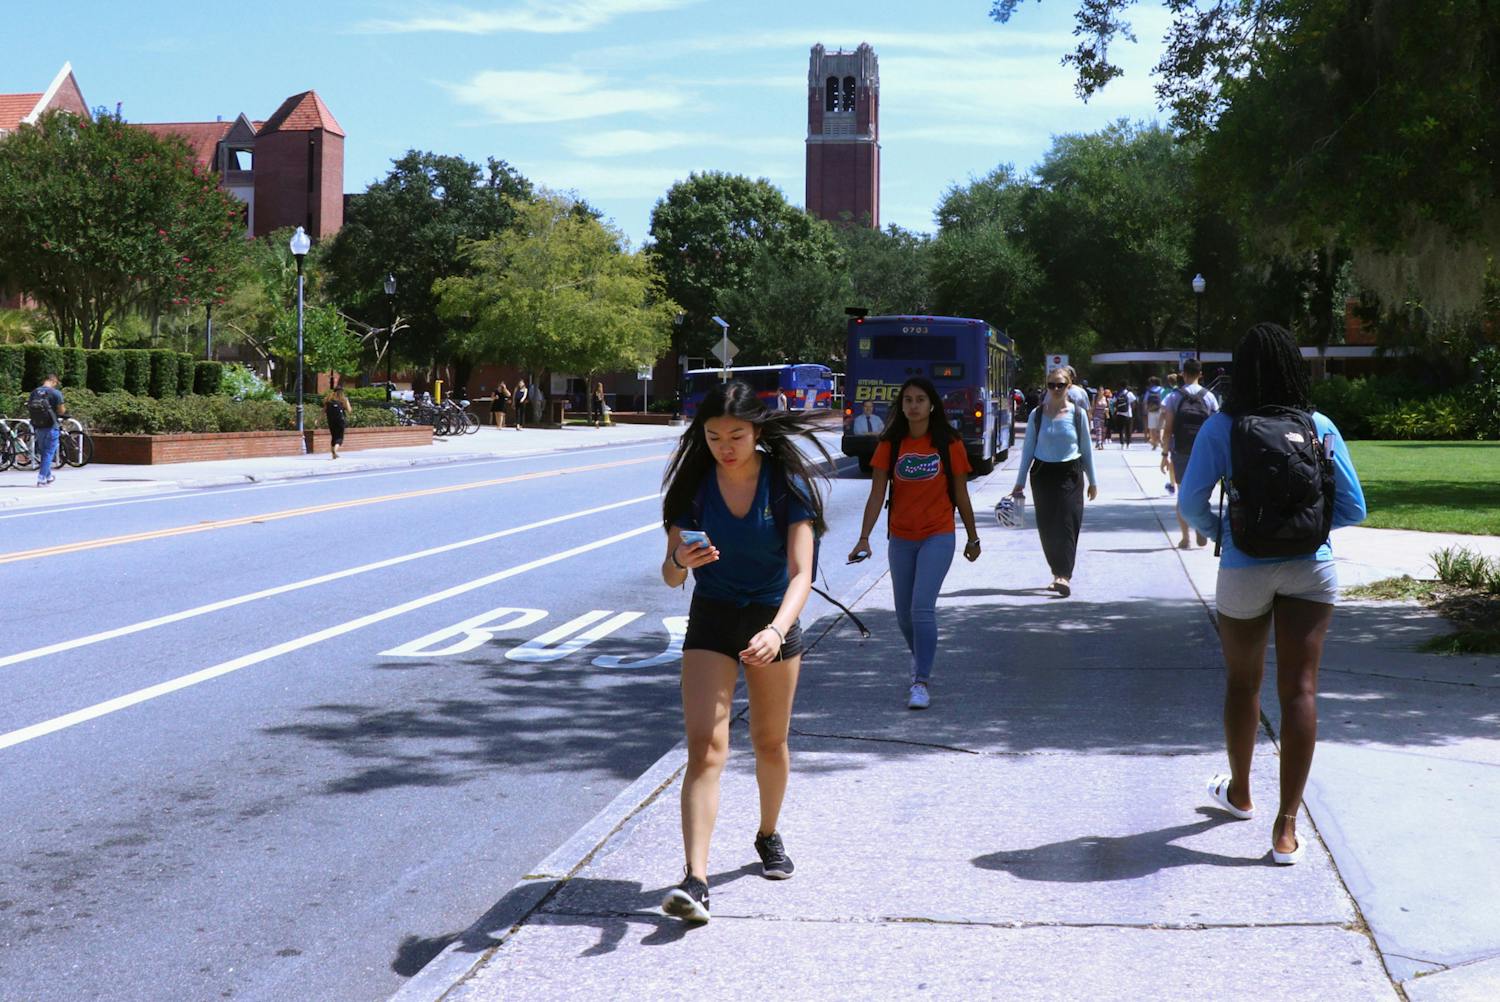 University of Florida students rush to and from class along Stadium Road prior to the pandemic, on September 17, 2019. The upcoming fall semester will see tens of thousands of students return to campus, although an increase in the number of delta variant COVID-19 infections raises concerns about viral spread among unvaccinated people.